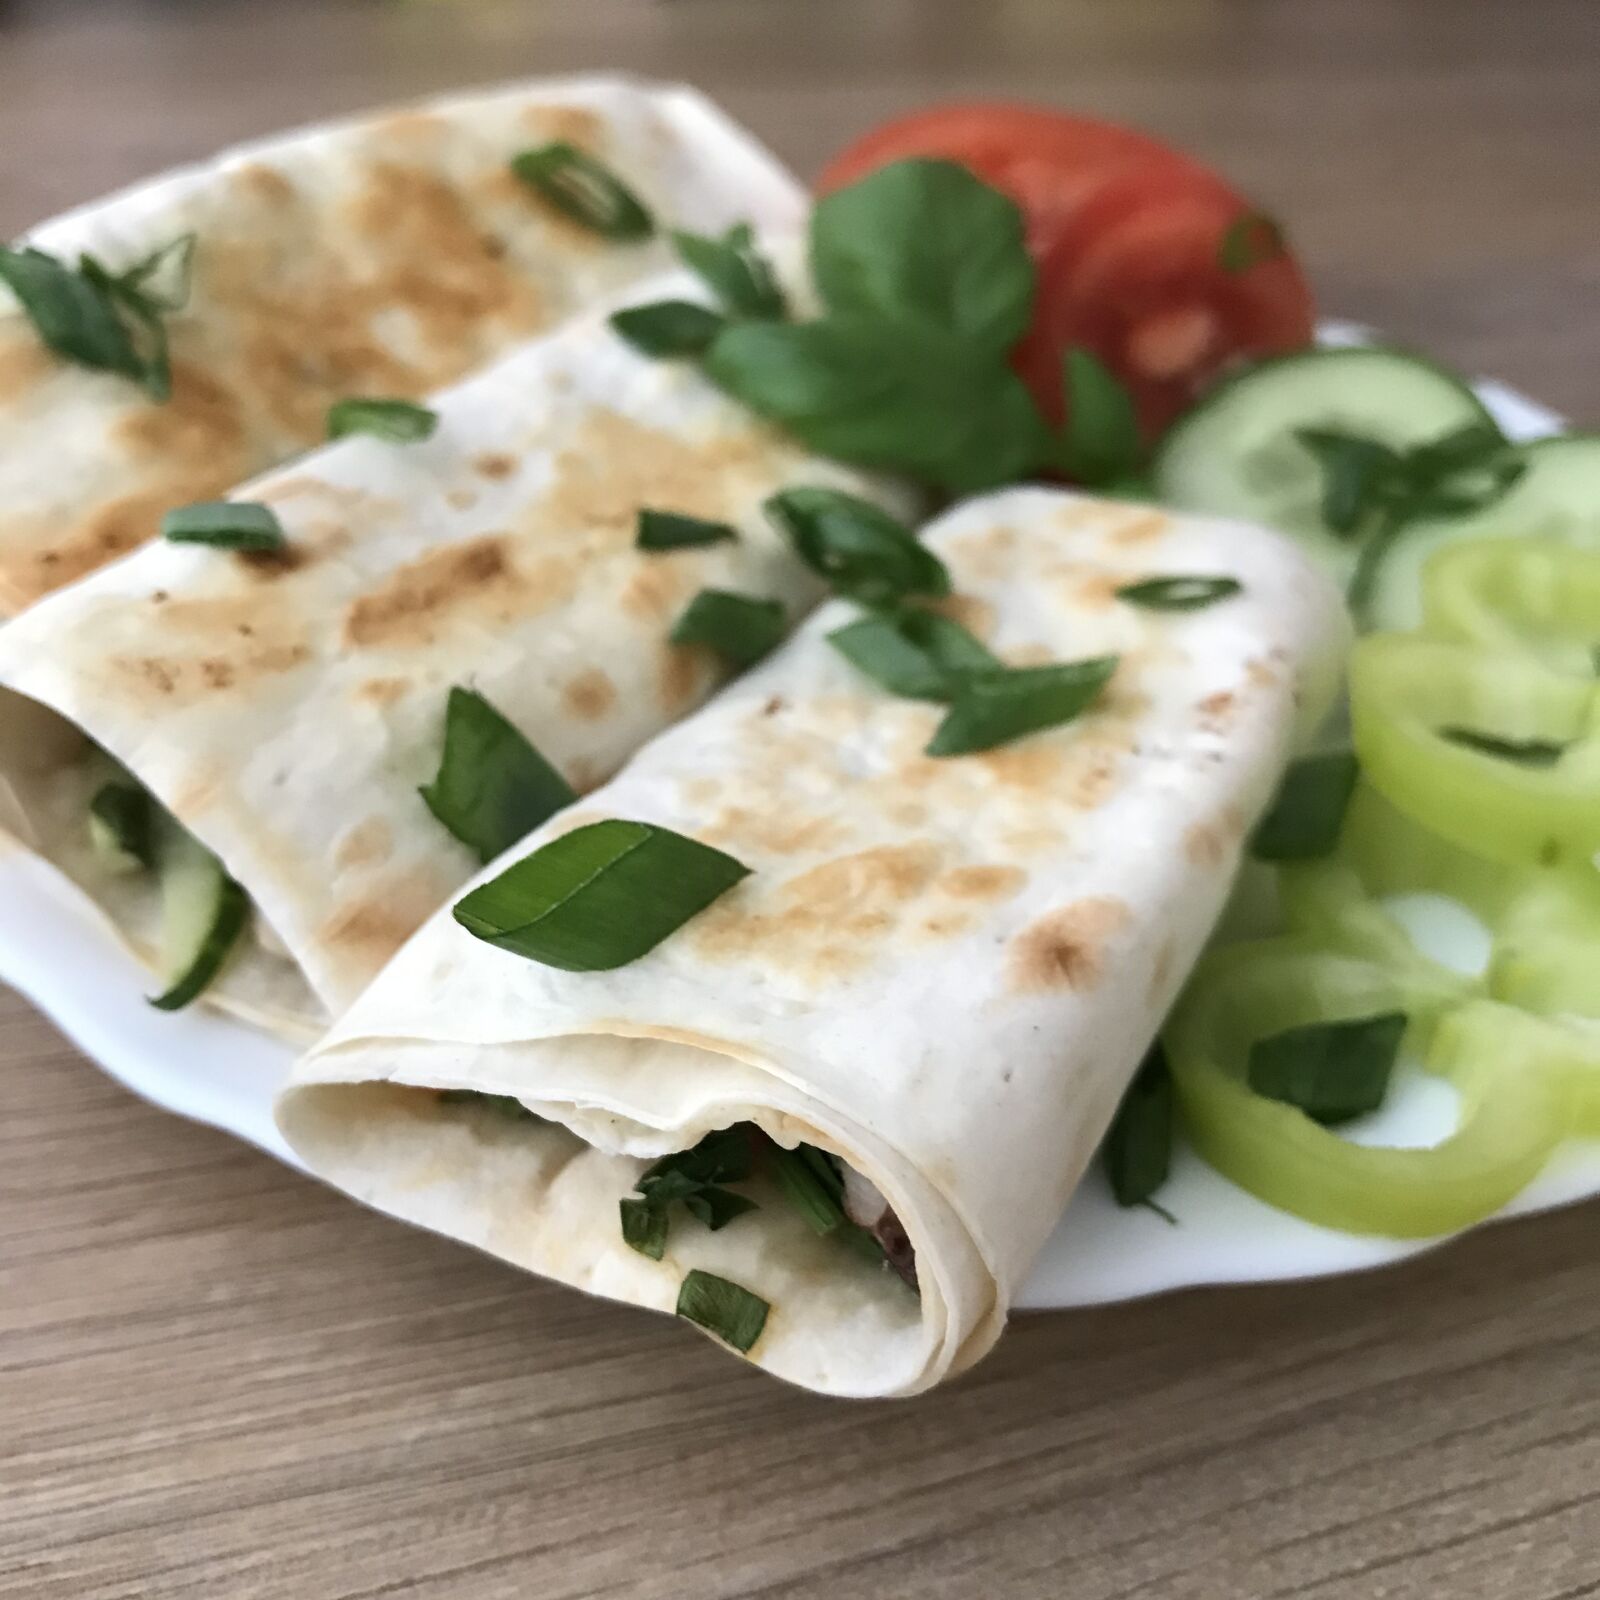 Apple iPhone 7 sample photo. Lavash on the plate photography